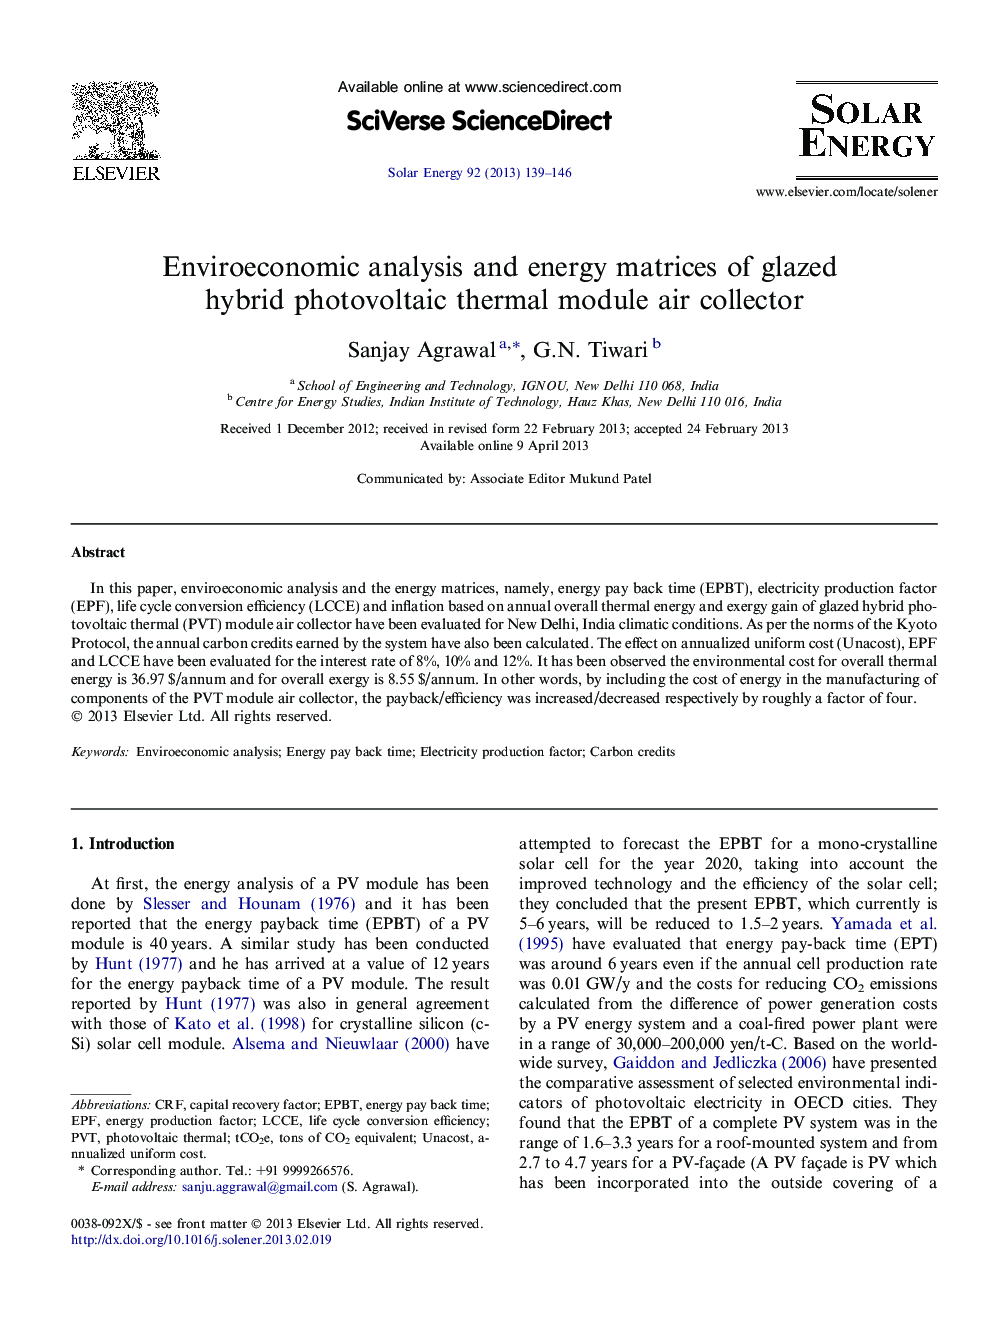 Enviroeconomic analysis and energy matrices of glazed hybrid photovoltaic thermal module air collector